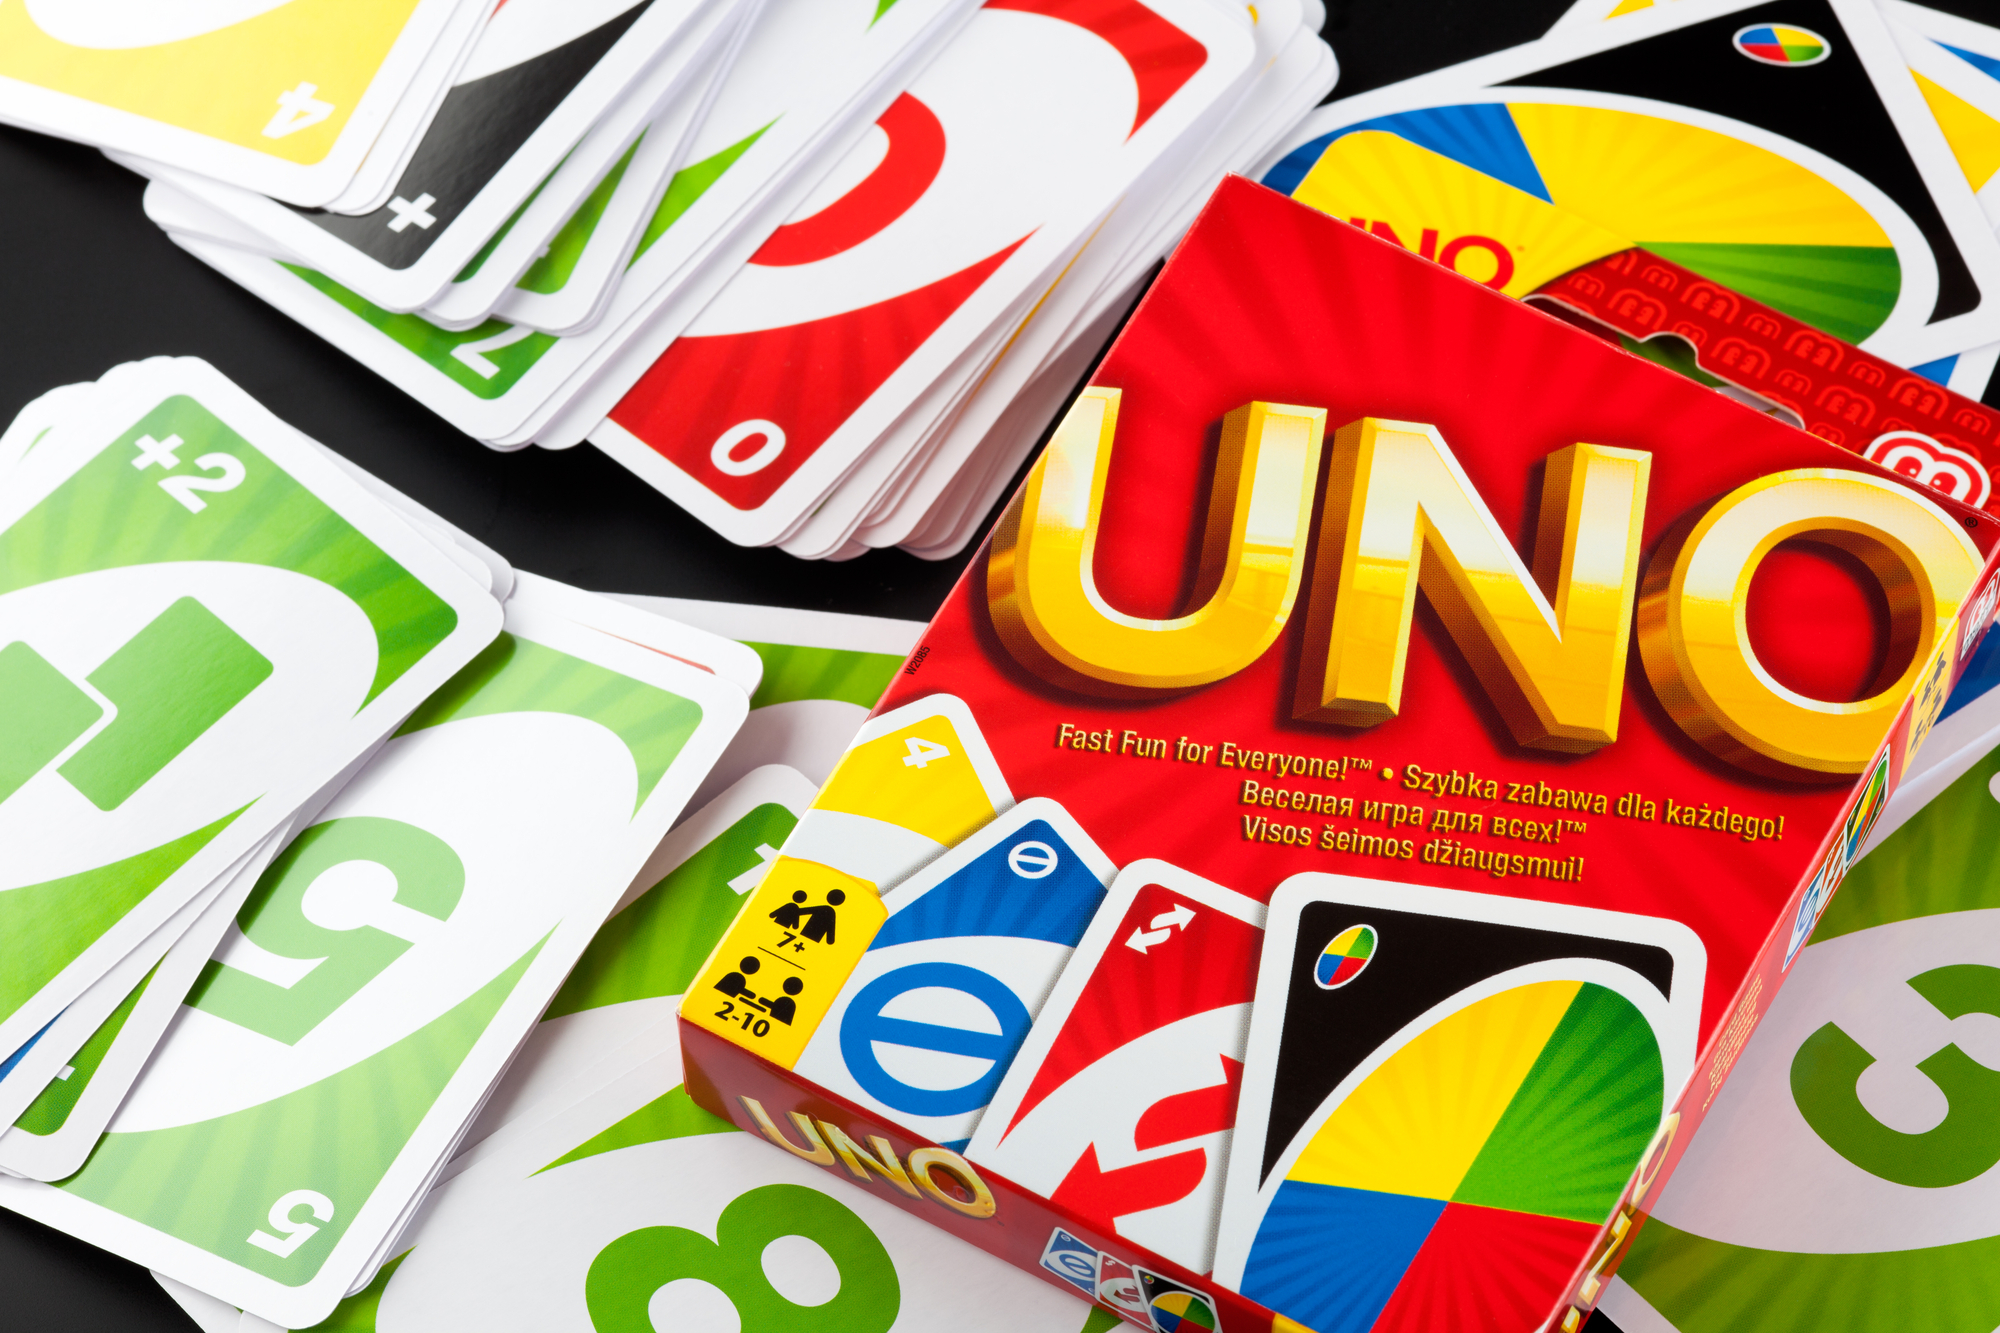 drunk-uno-drinking-game-rules-games-night-pro